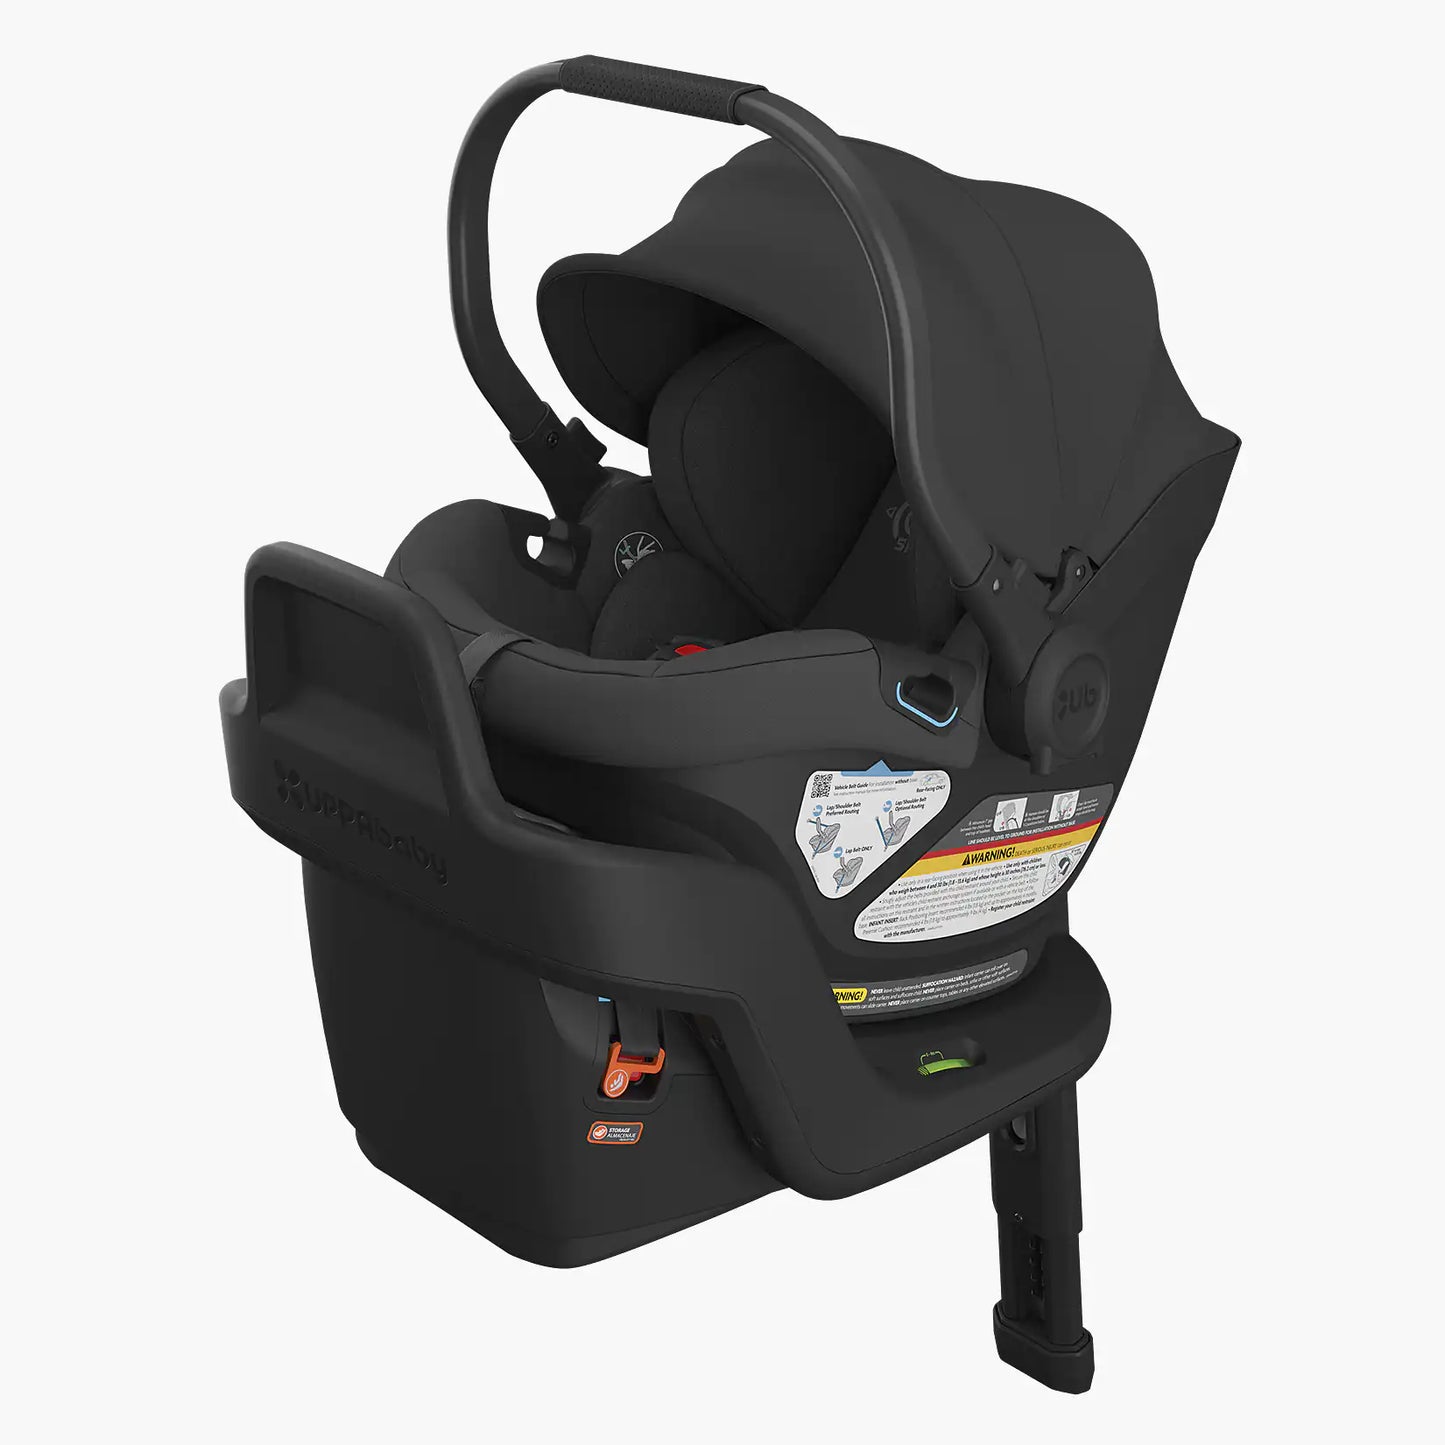 ARIA Infant Car Seat - JAKE (BACKORDERED UNTIL JUNE)  - DROPSHIP ITEM - PLEASE ALLOW ONE WEEK FOR PROCESSING